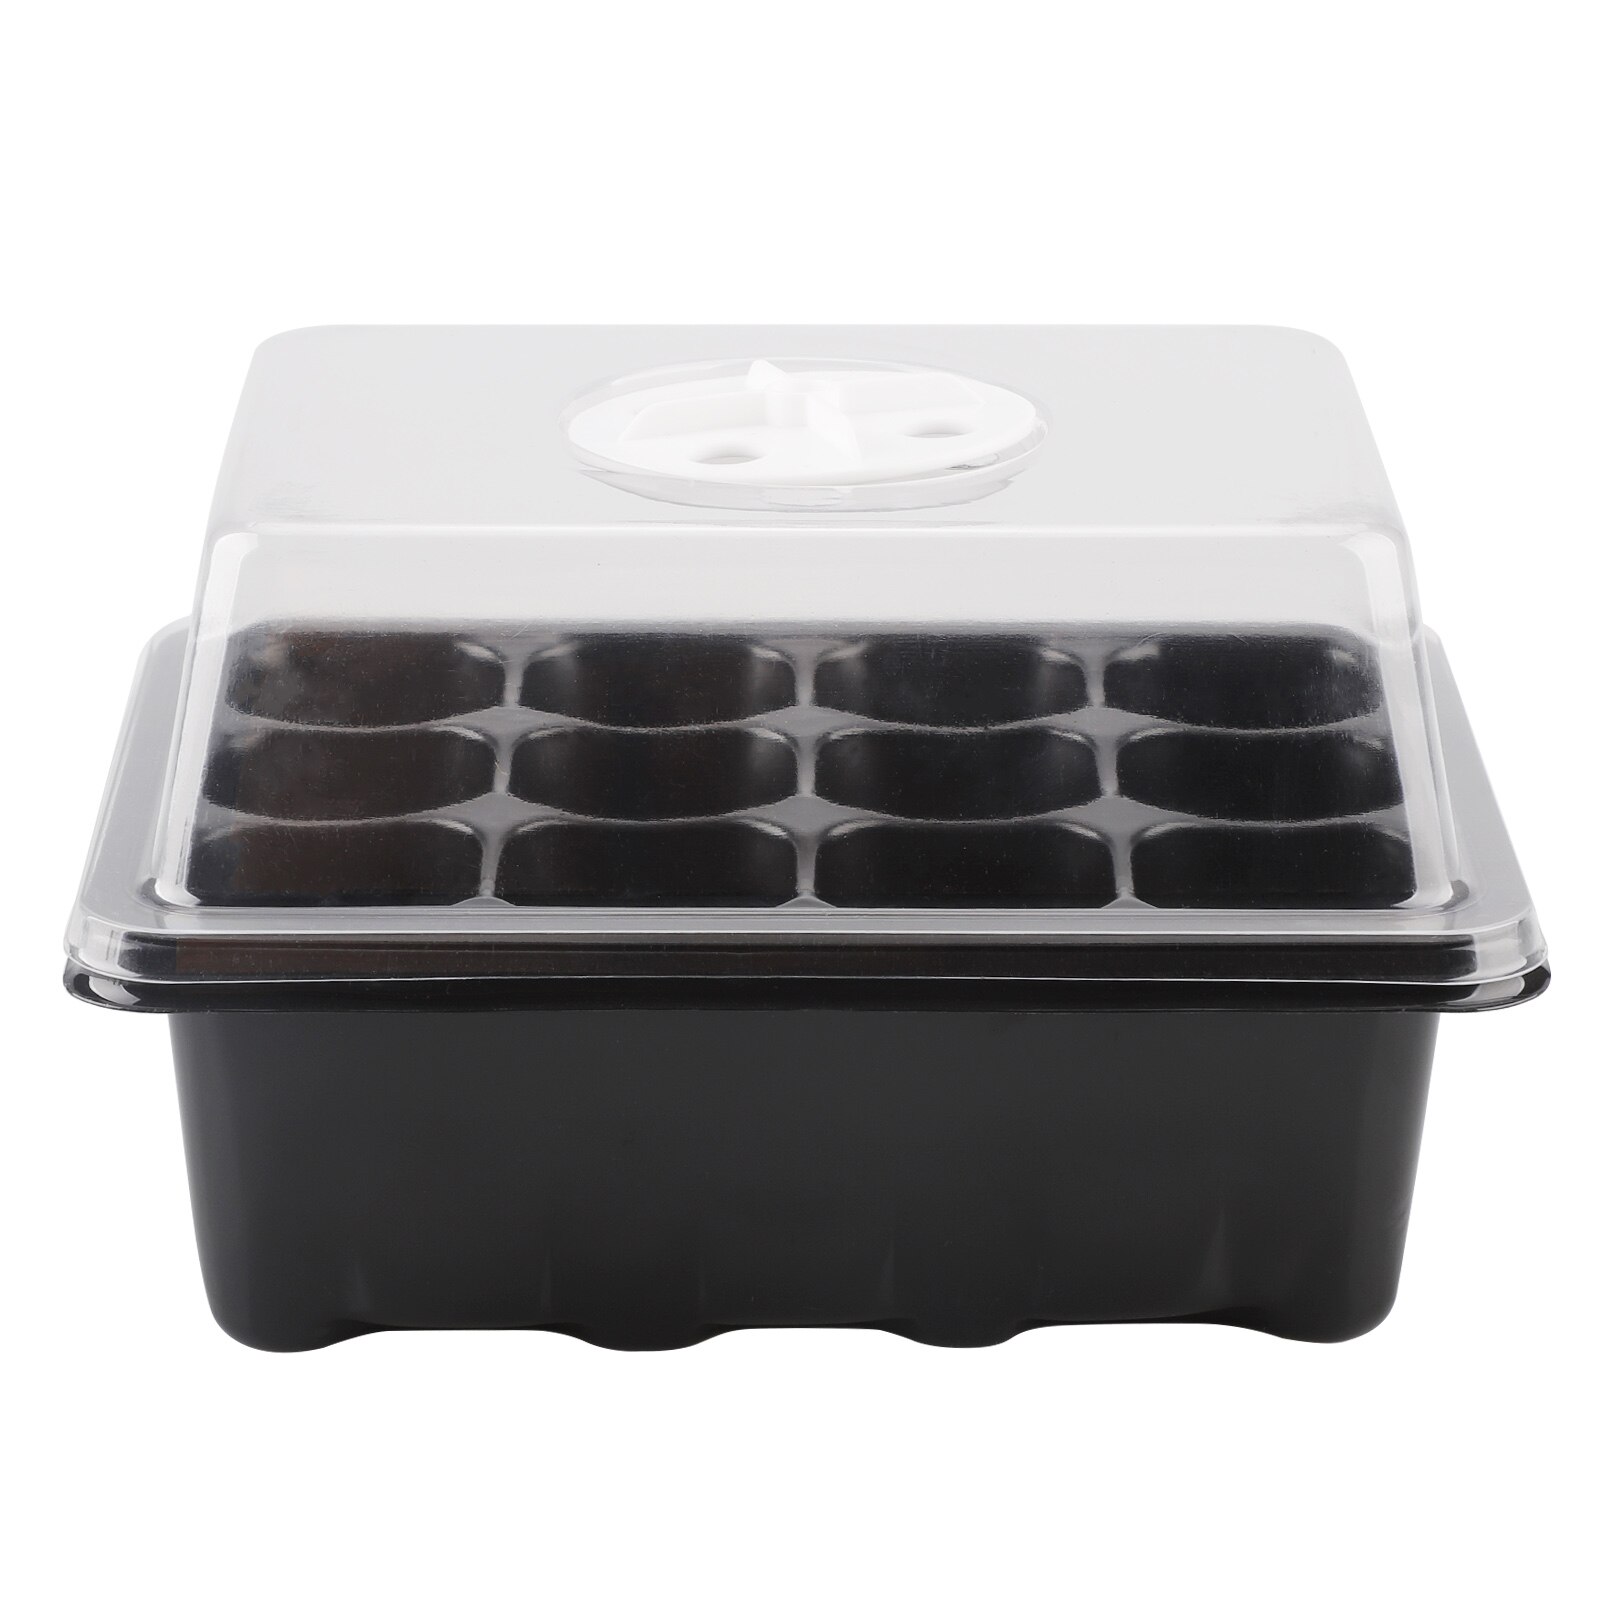 Seedling Box Seedling Propagation Kit Seedling Starter Tray Set Humidity Vented Domes Plant Lables 6 Cells Plant Growth Tray